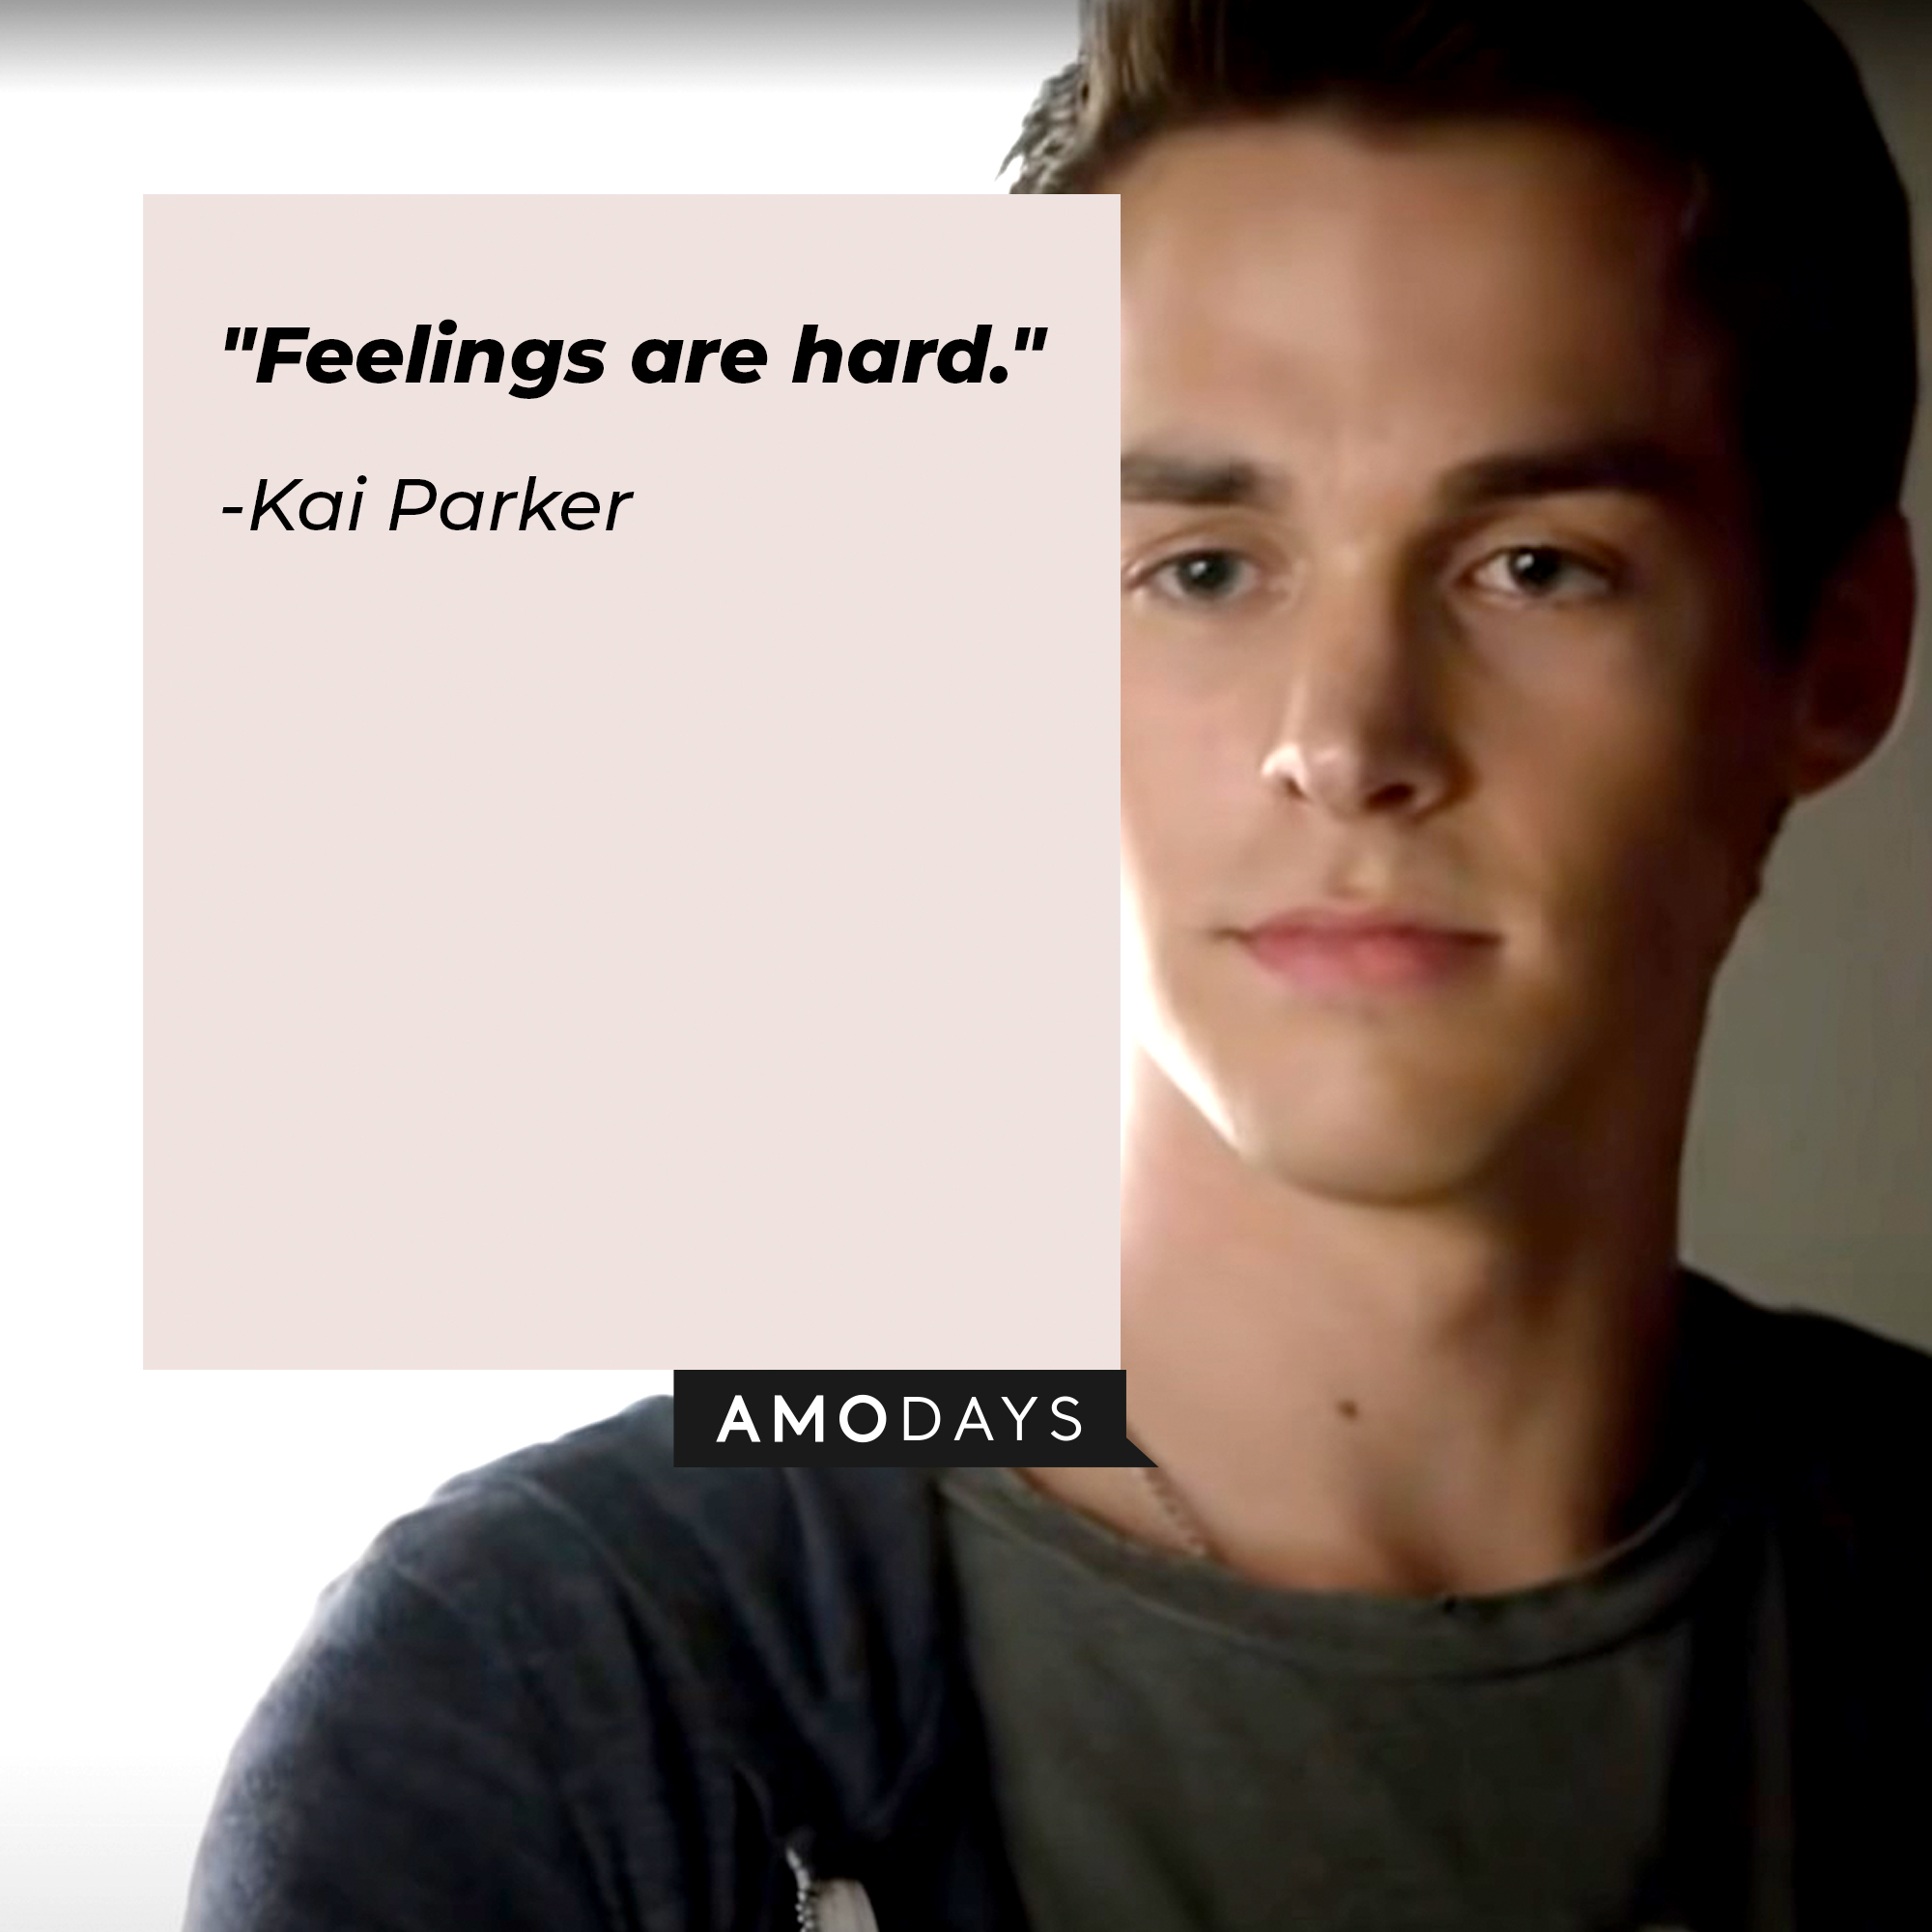 Kai Parker's quote: "Feelings are hard." | Source: Facebook.com/thevampirediaries